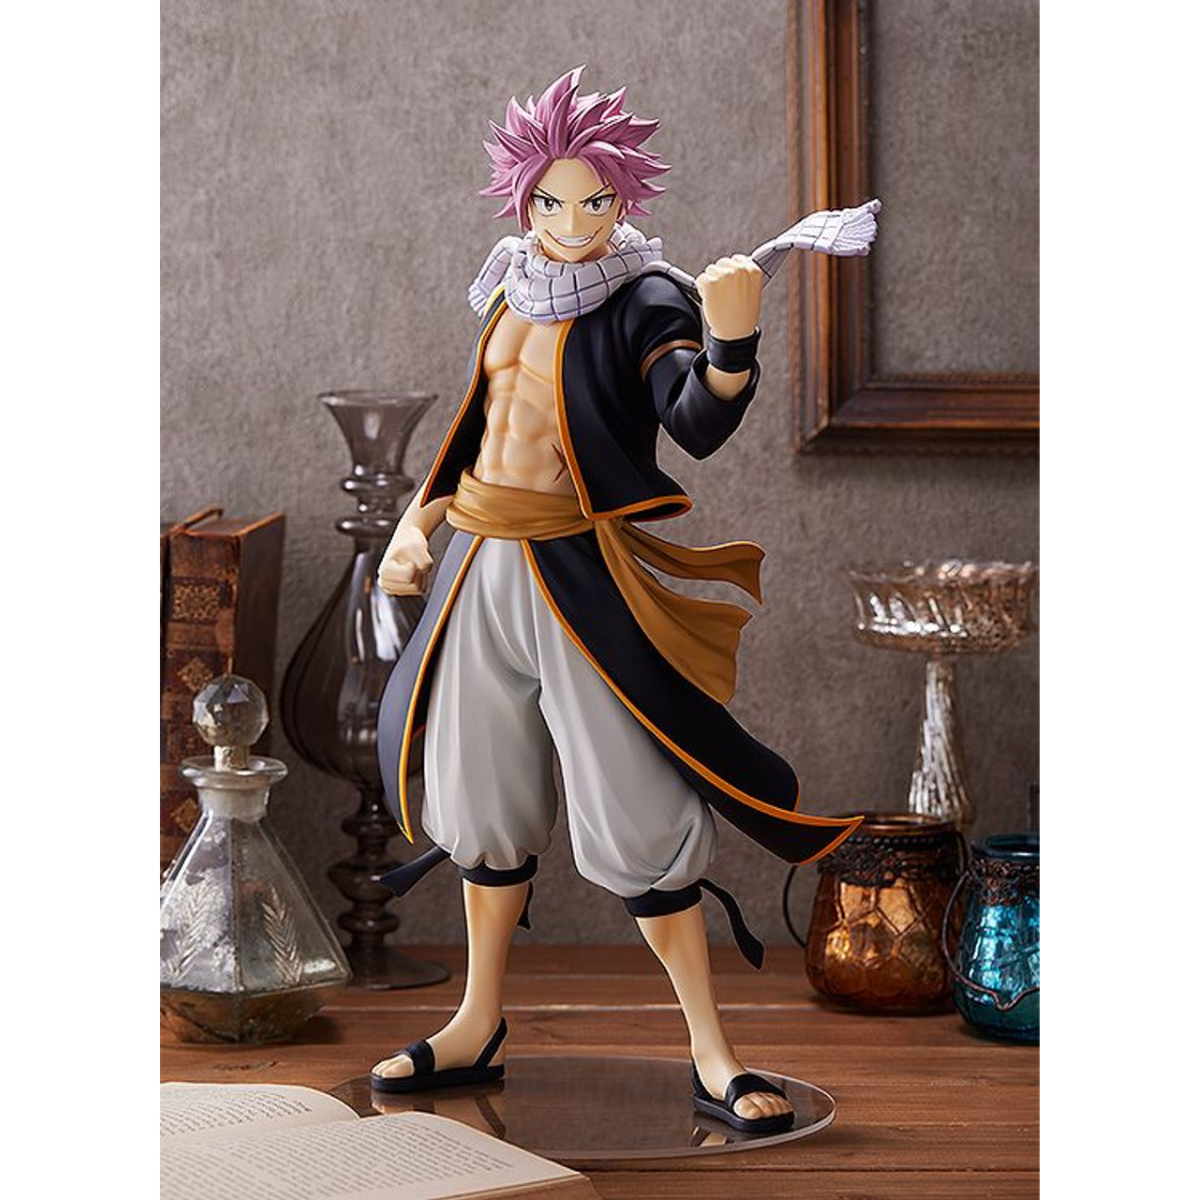 Fairy Tail Final Season Pop Up Parade "Natsu Dragneel" (XL Ver.)-Good Smile Company-Ace Cards & Collectibles